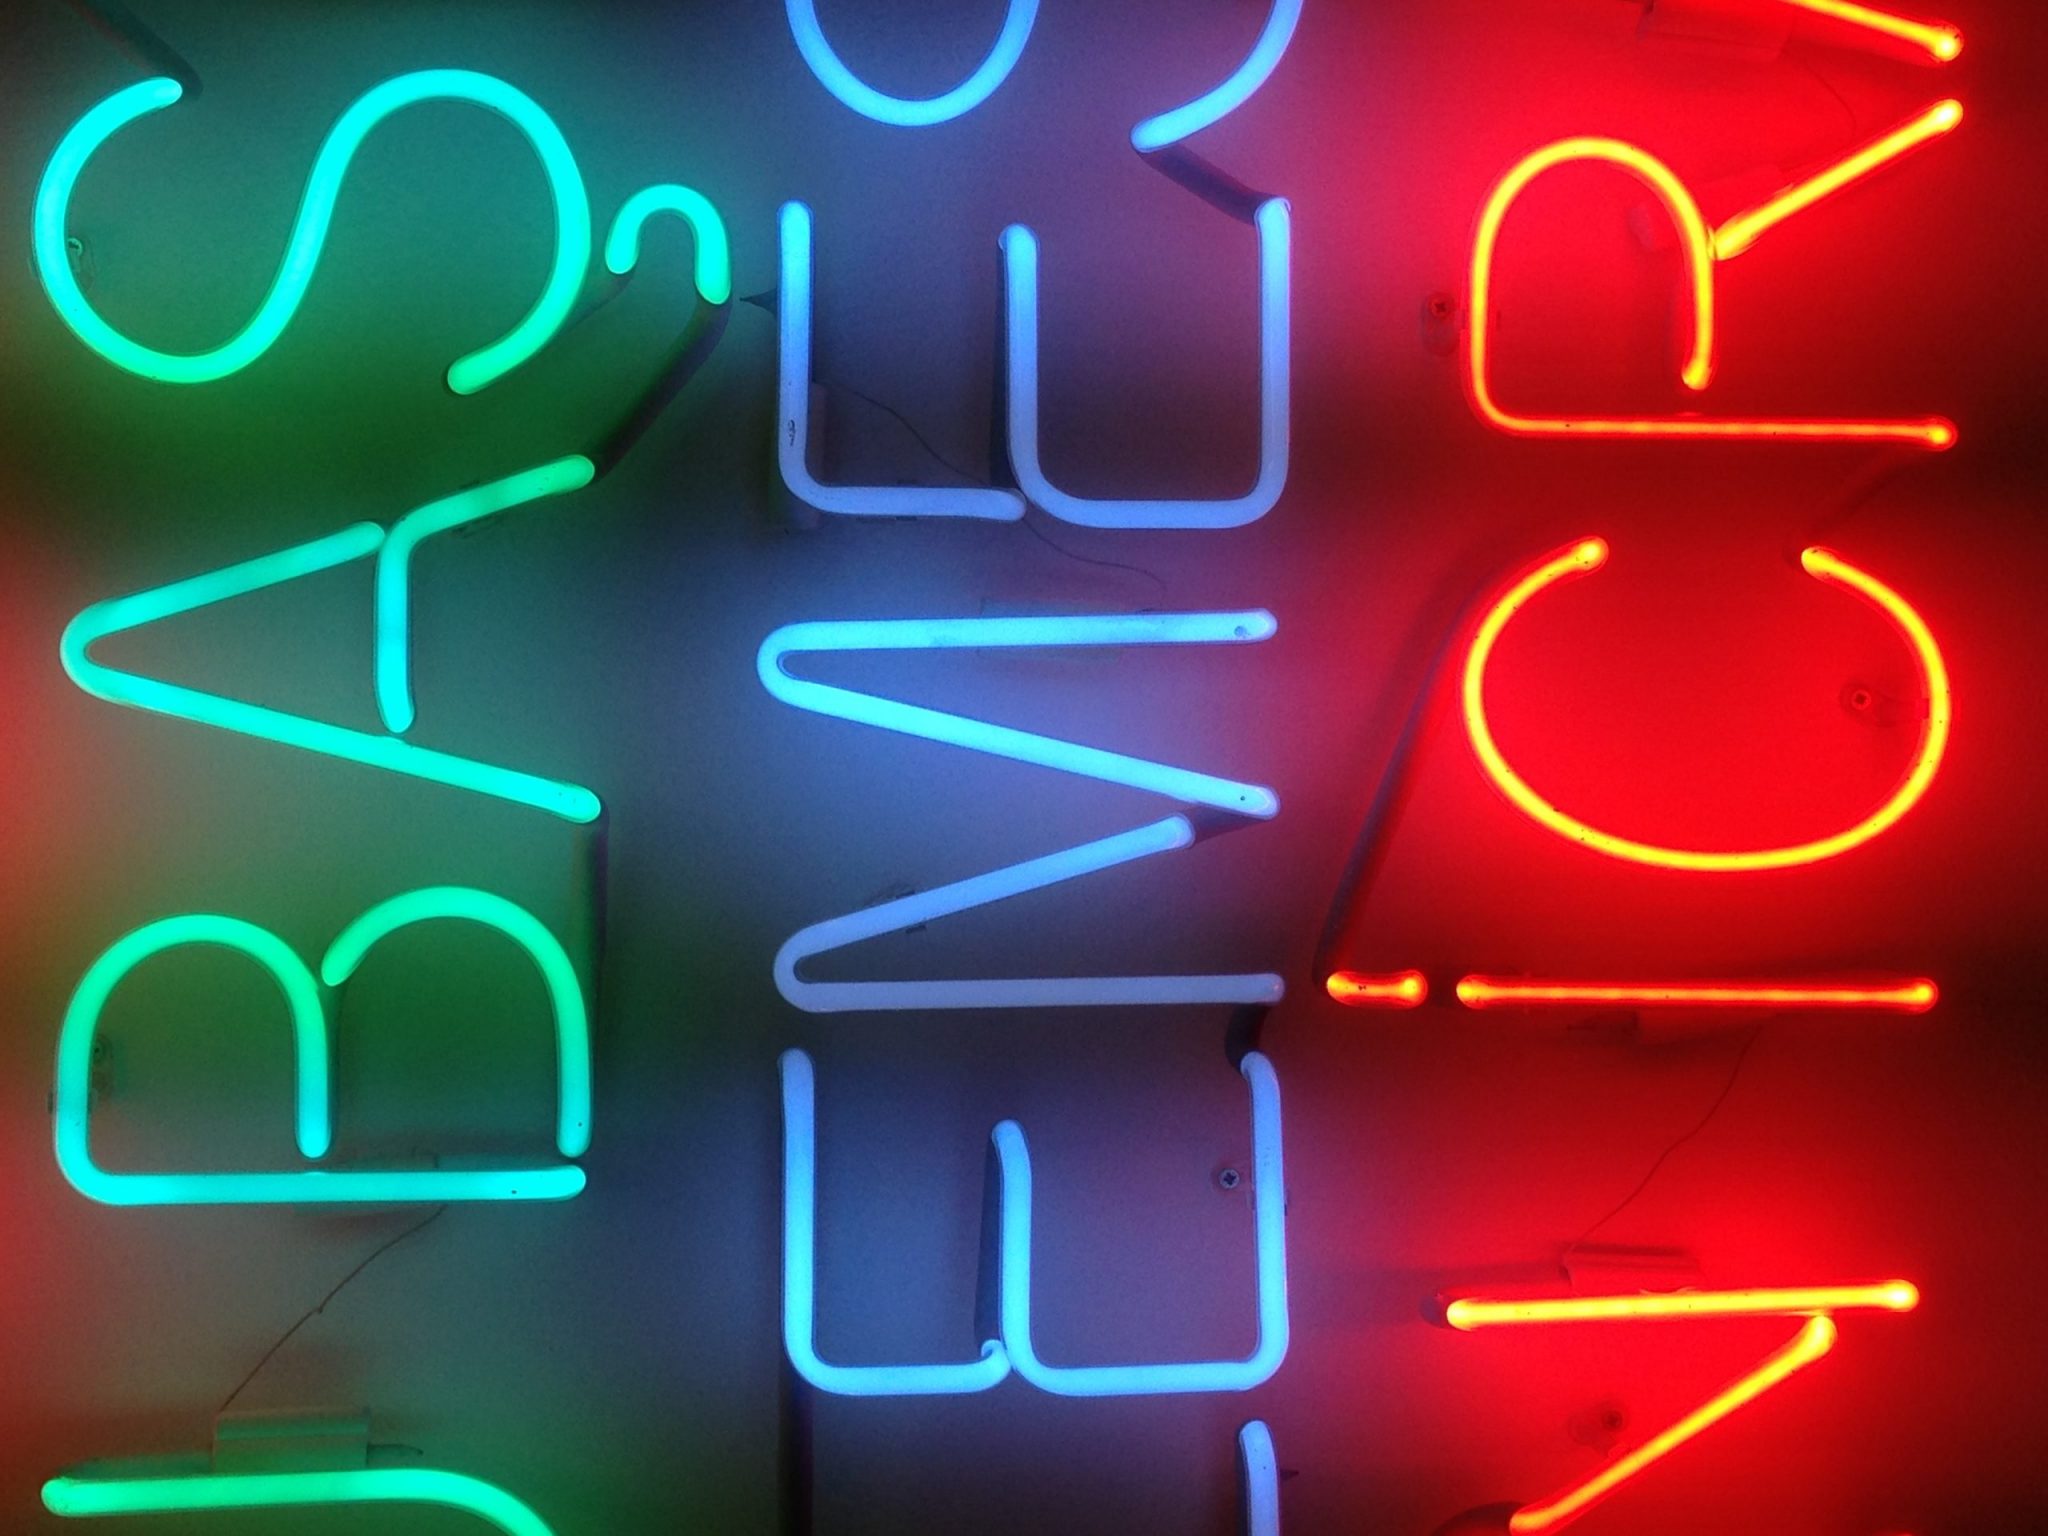 Beautiful photo of neon signs, lettering in green blue and red